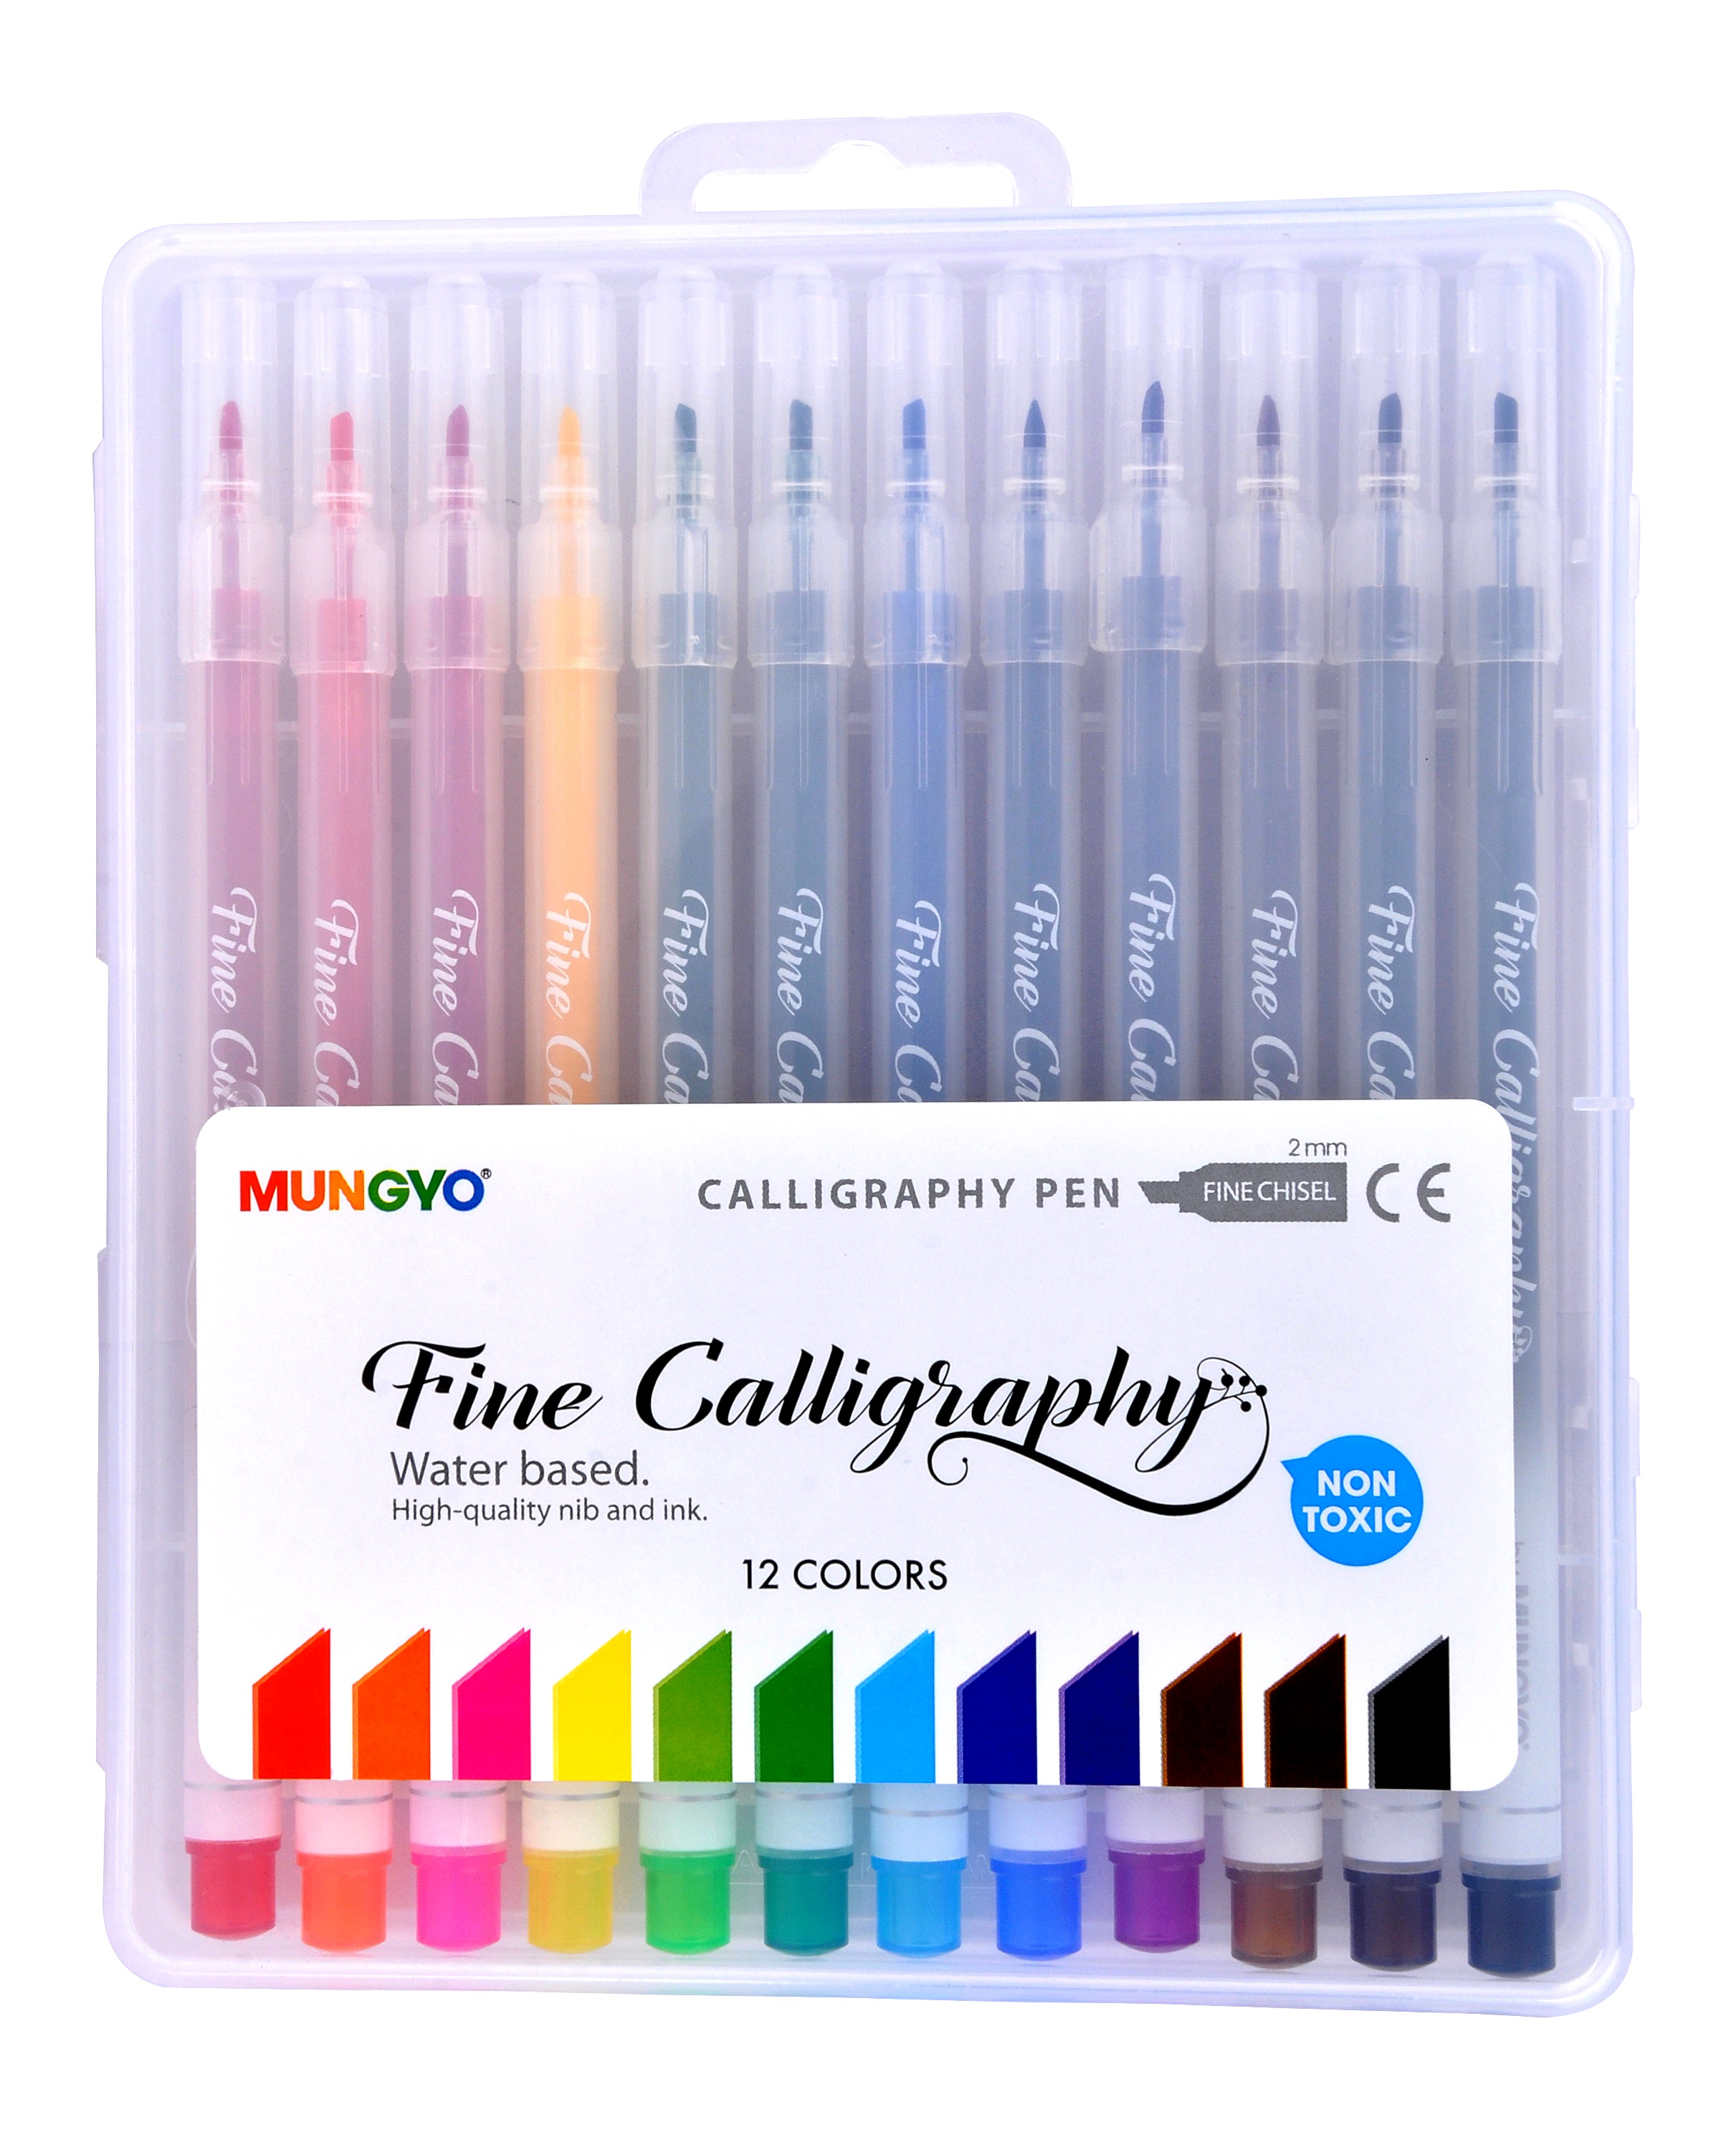 MUNGYO FINE CALLIGRAPHY PENS, SET OF 12 ASSORTED COLORS IN TRAVEL CASE